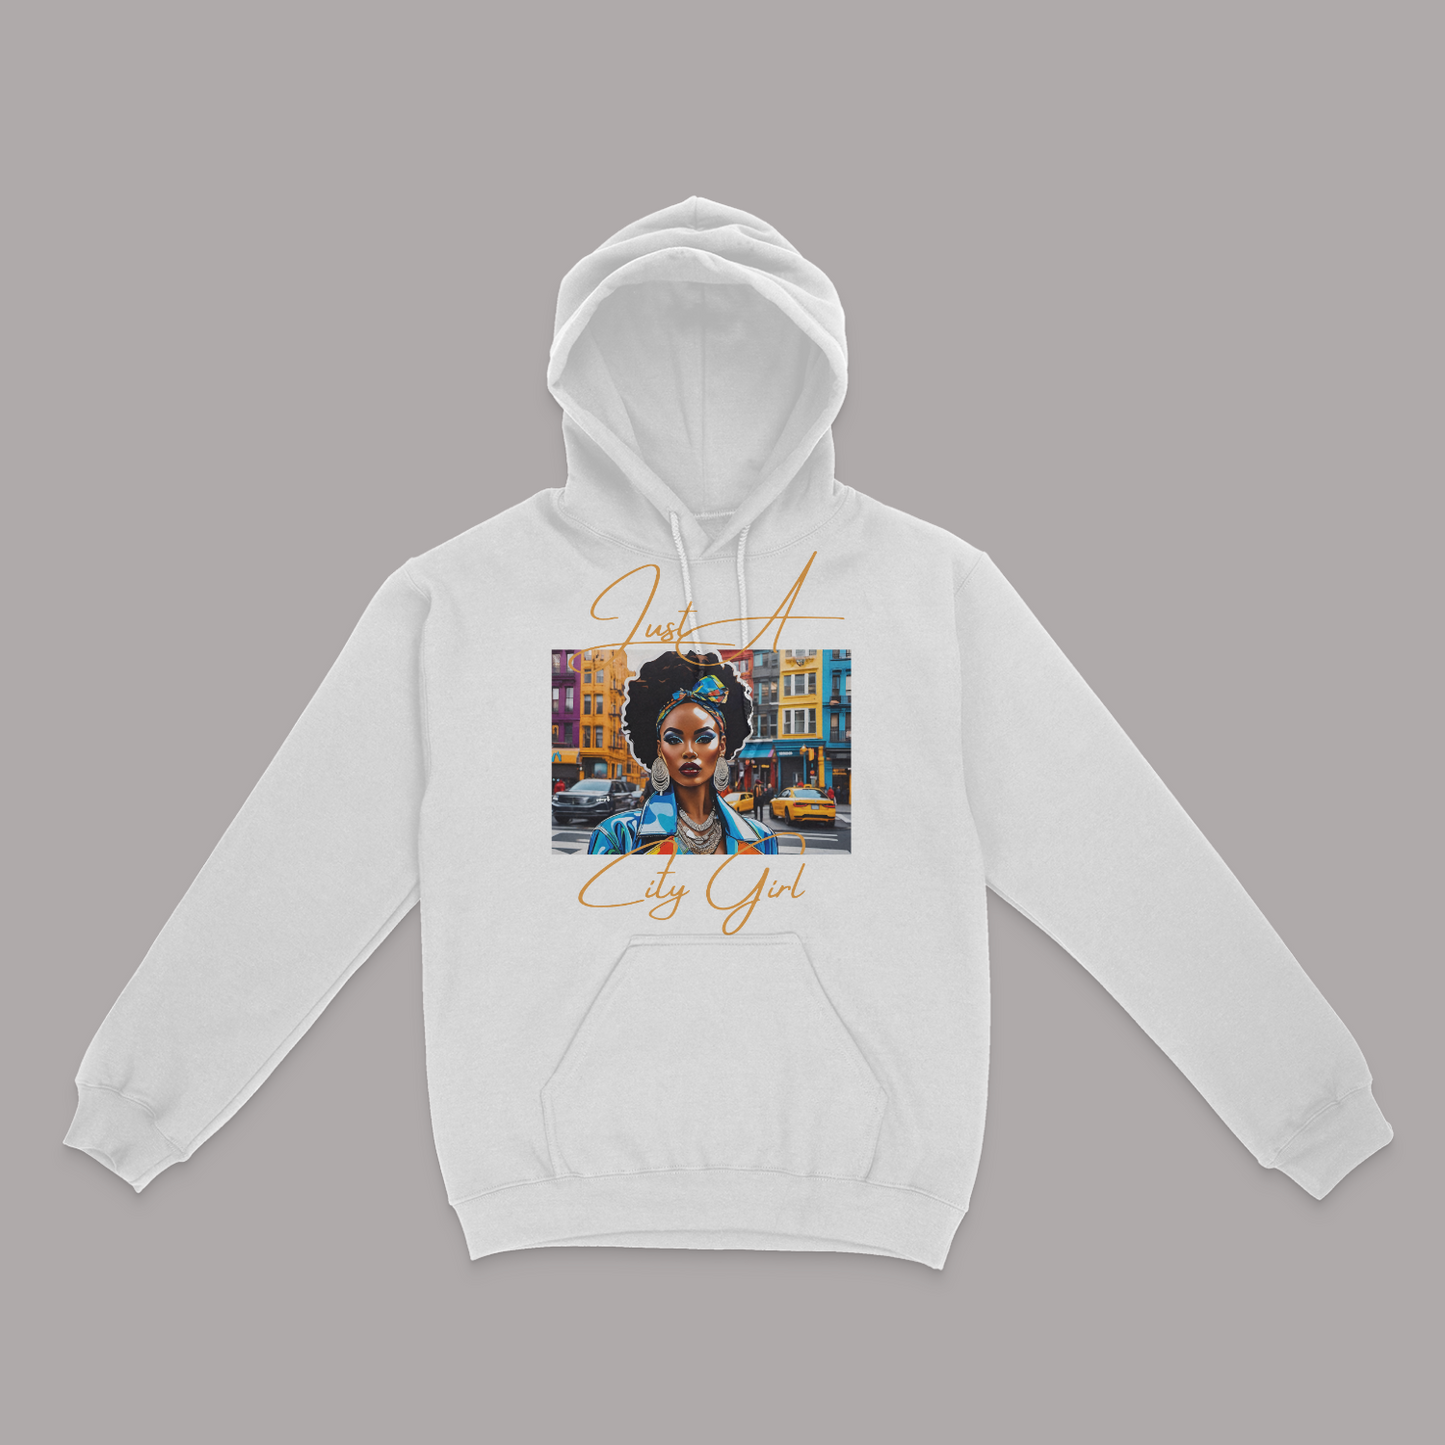 Just A City Girl Graphic Unisex Hoodie